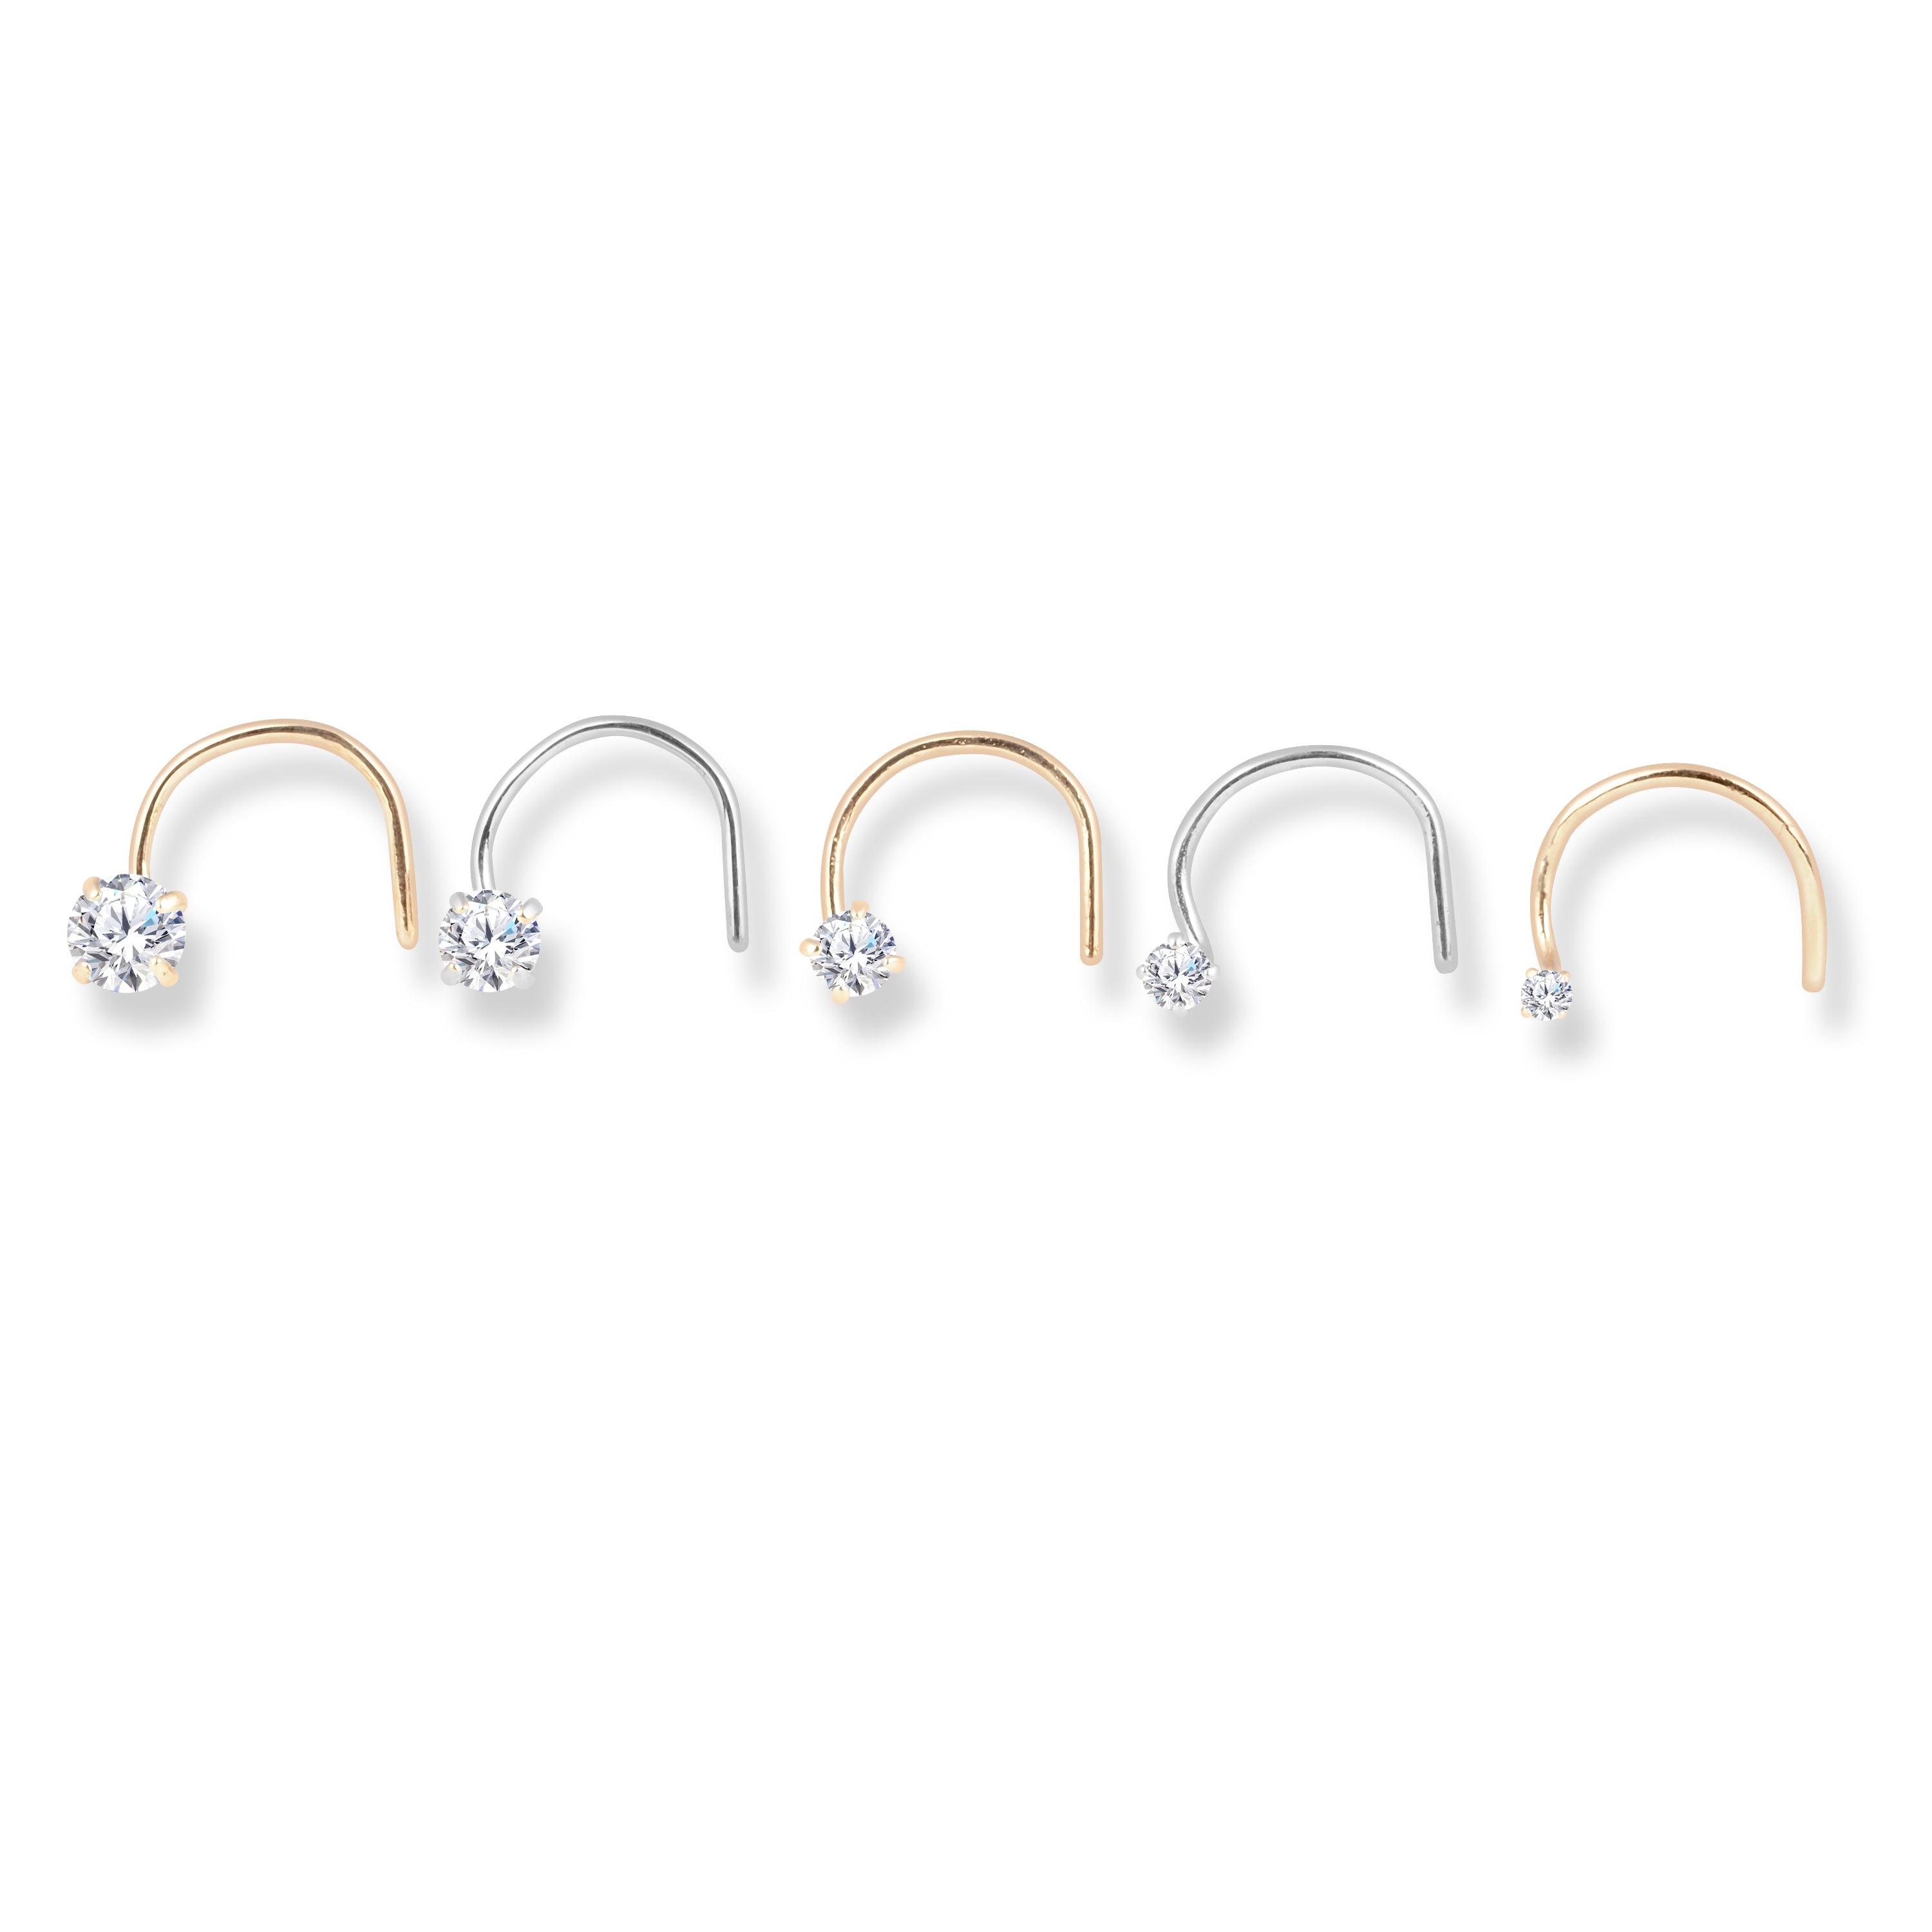 18ct Yellow / White Gold Wire Back Nose Stud with Cubic Zirconia Stone in a Four Claw Setting (1.5mm - 3.5mm) NS-7560 - Minar Jewellers